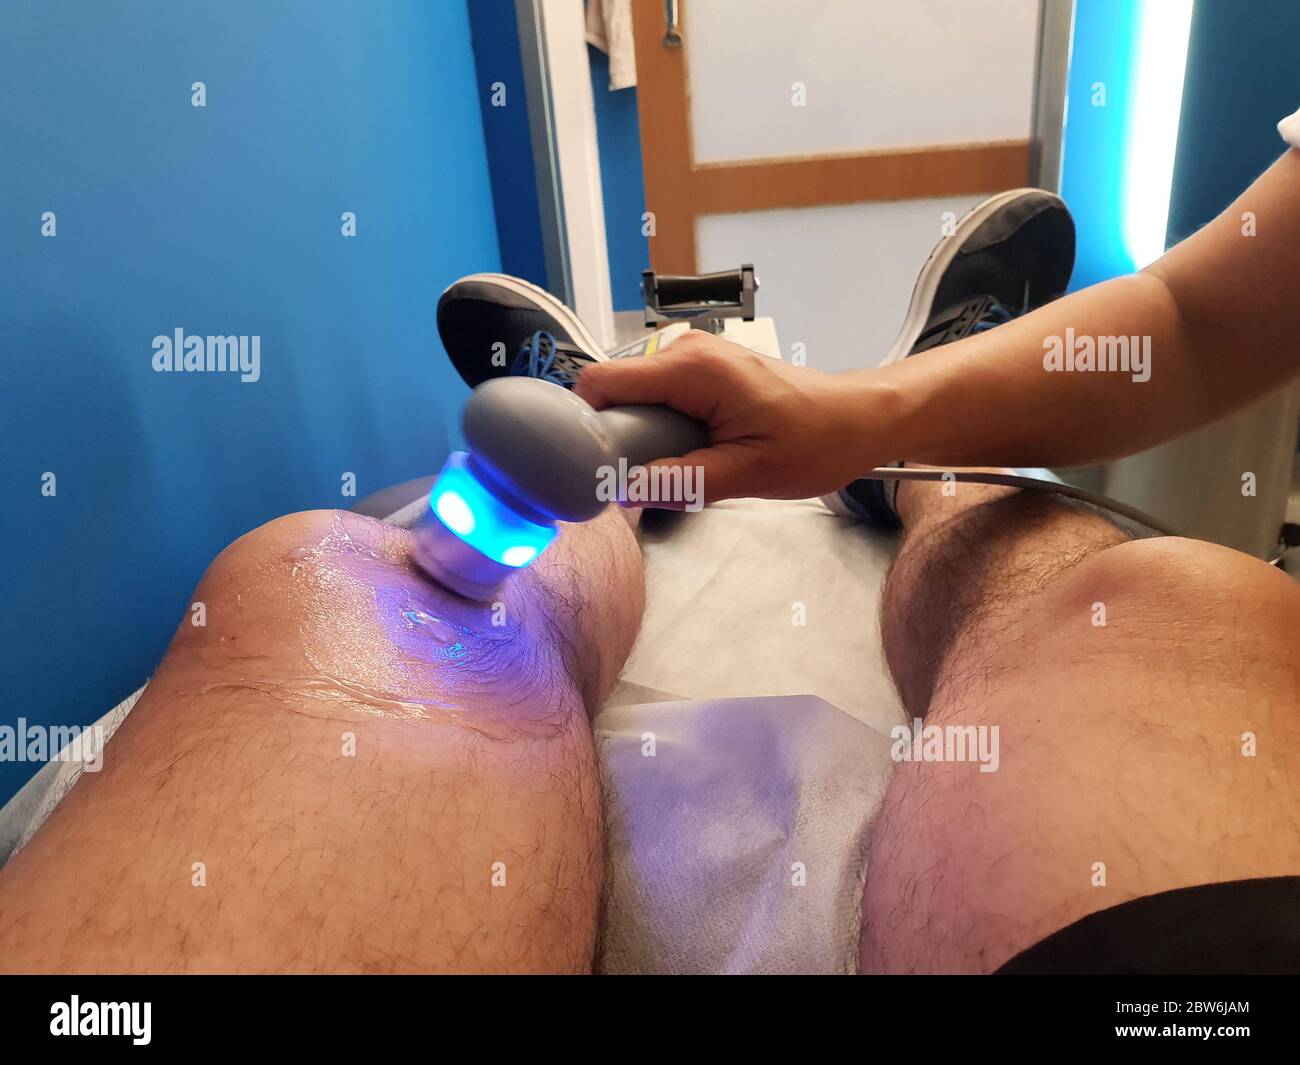 Physiotherapist is applying ultrasound therapy on the knee injury with ultrasound head transducer, blured motion Stock Photo